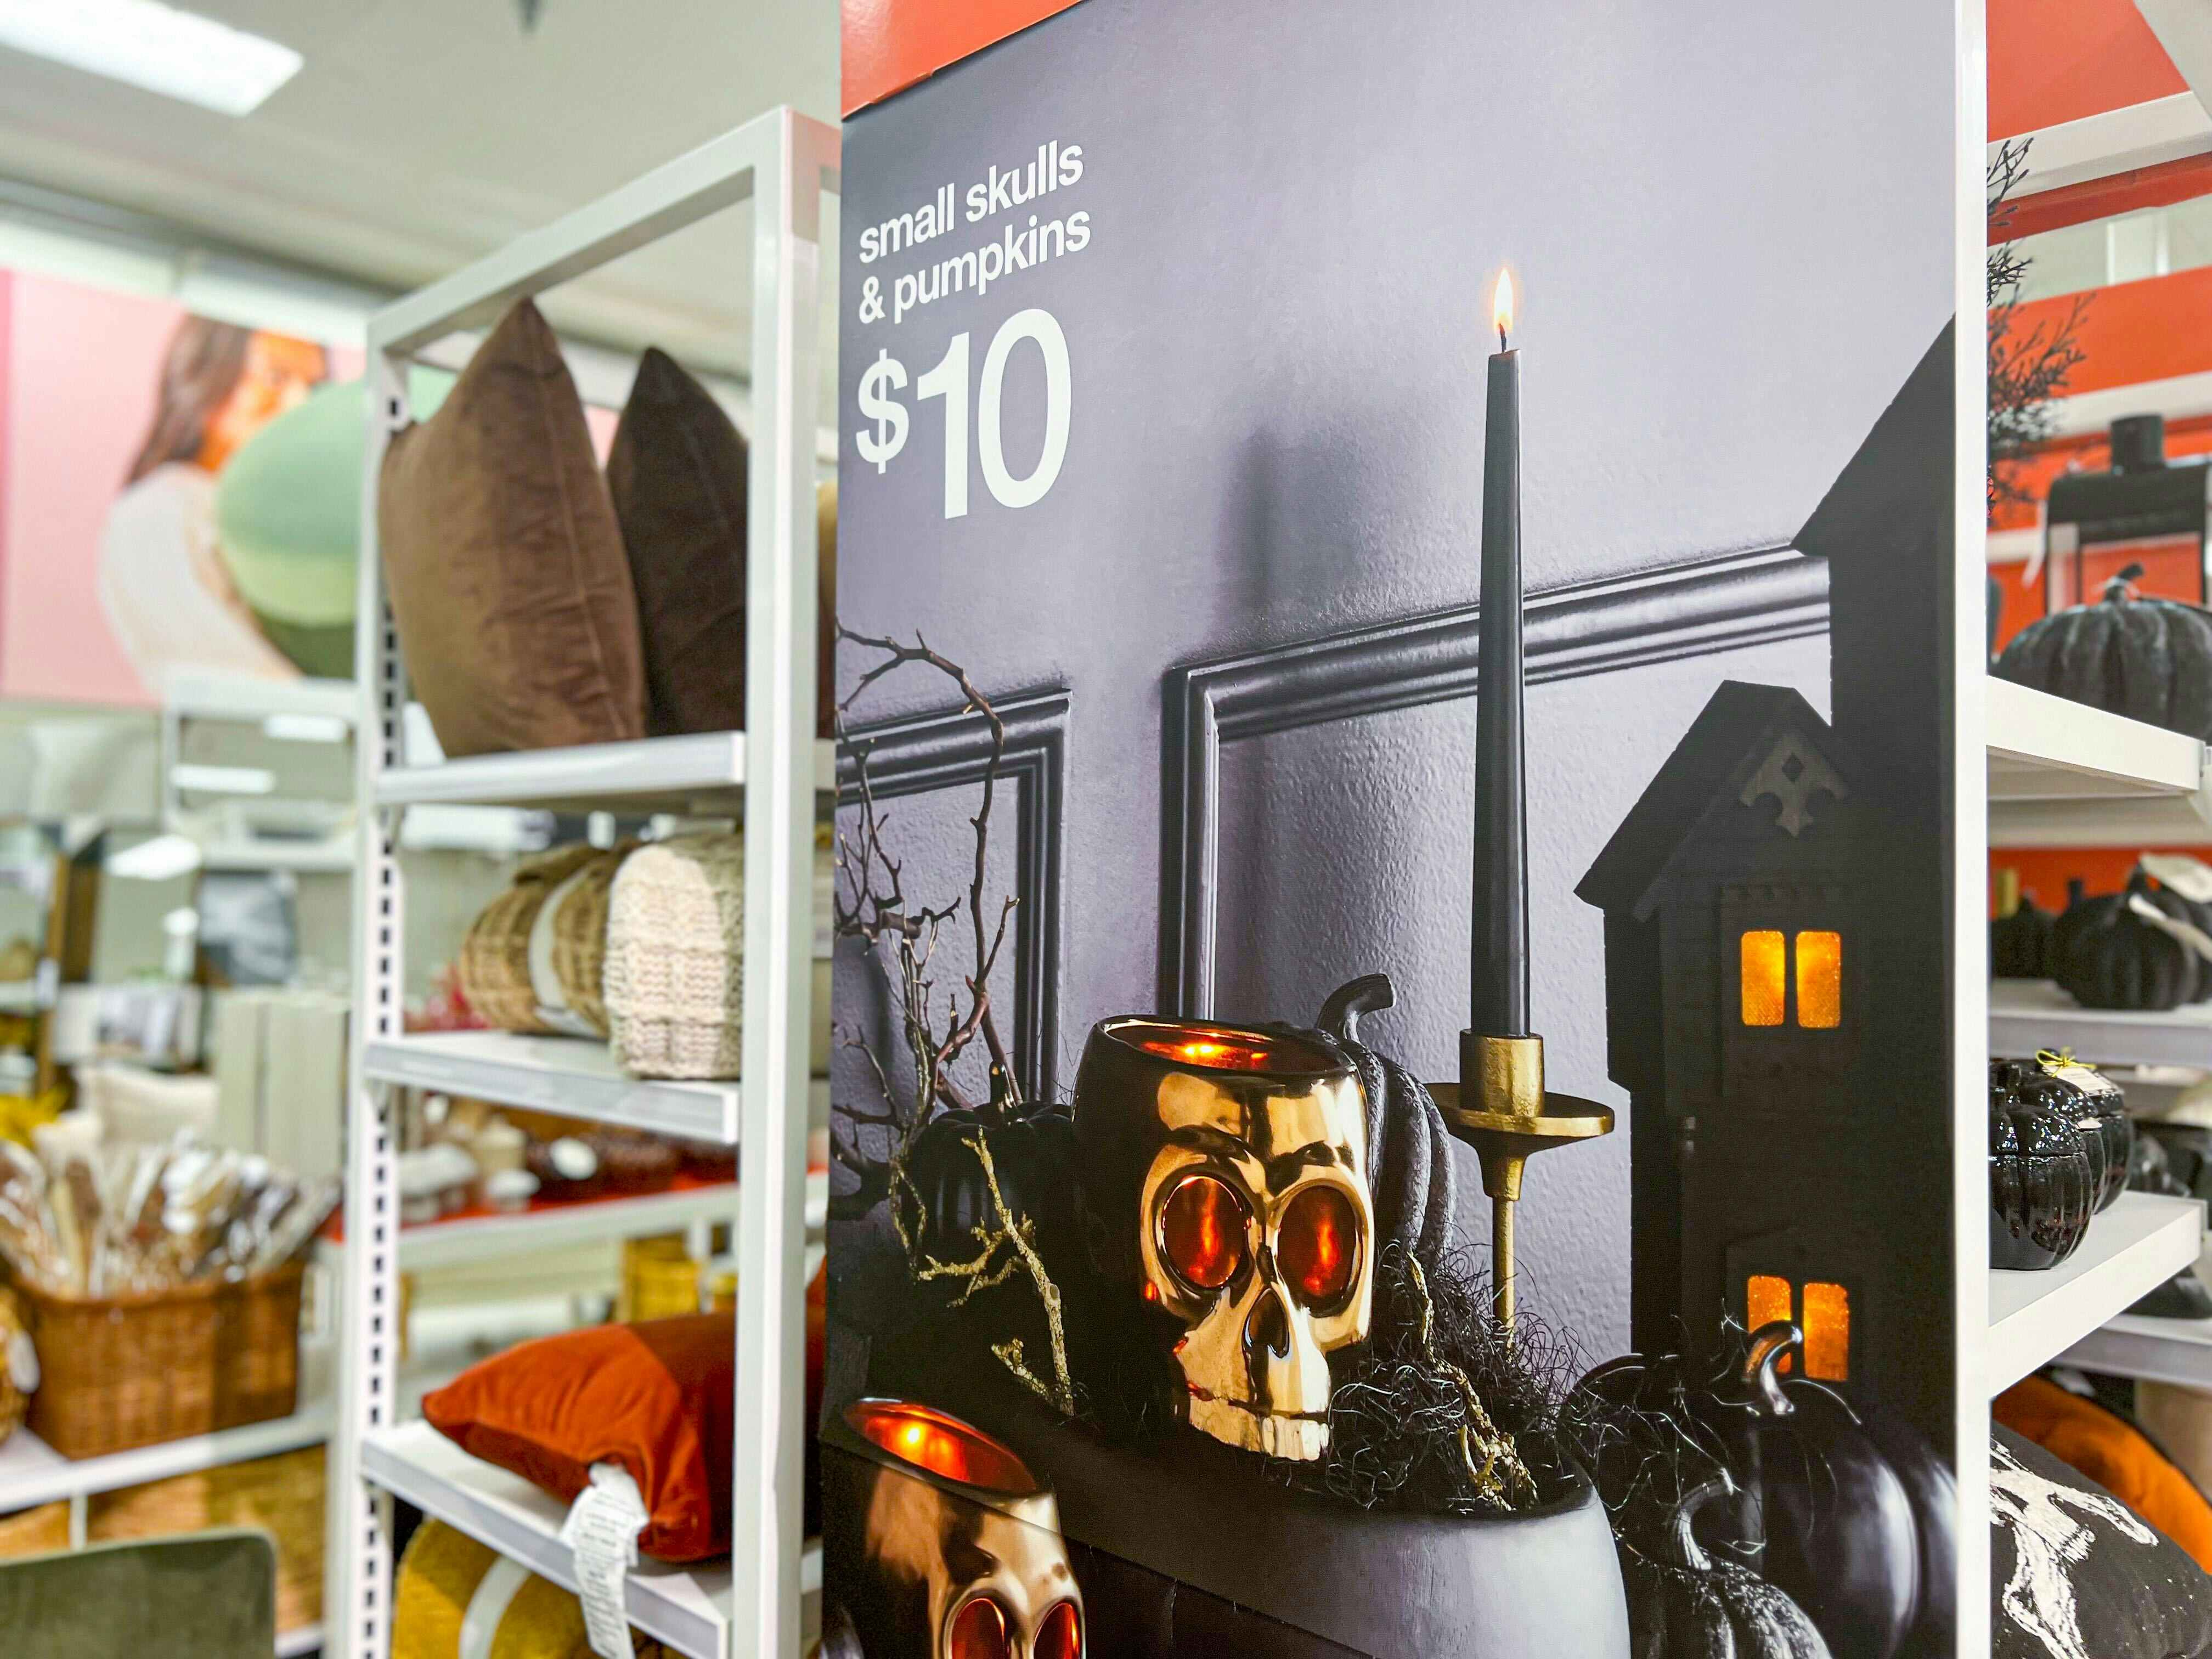 A halloween sign at target that reads: small skulls and pumpkins for $10